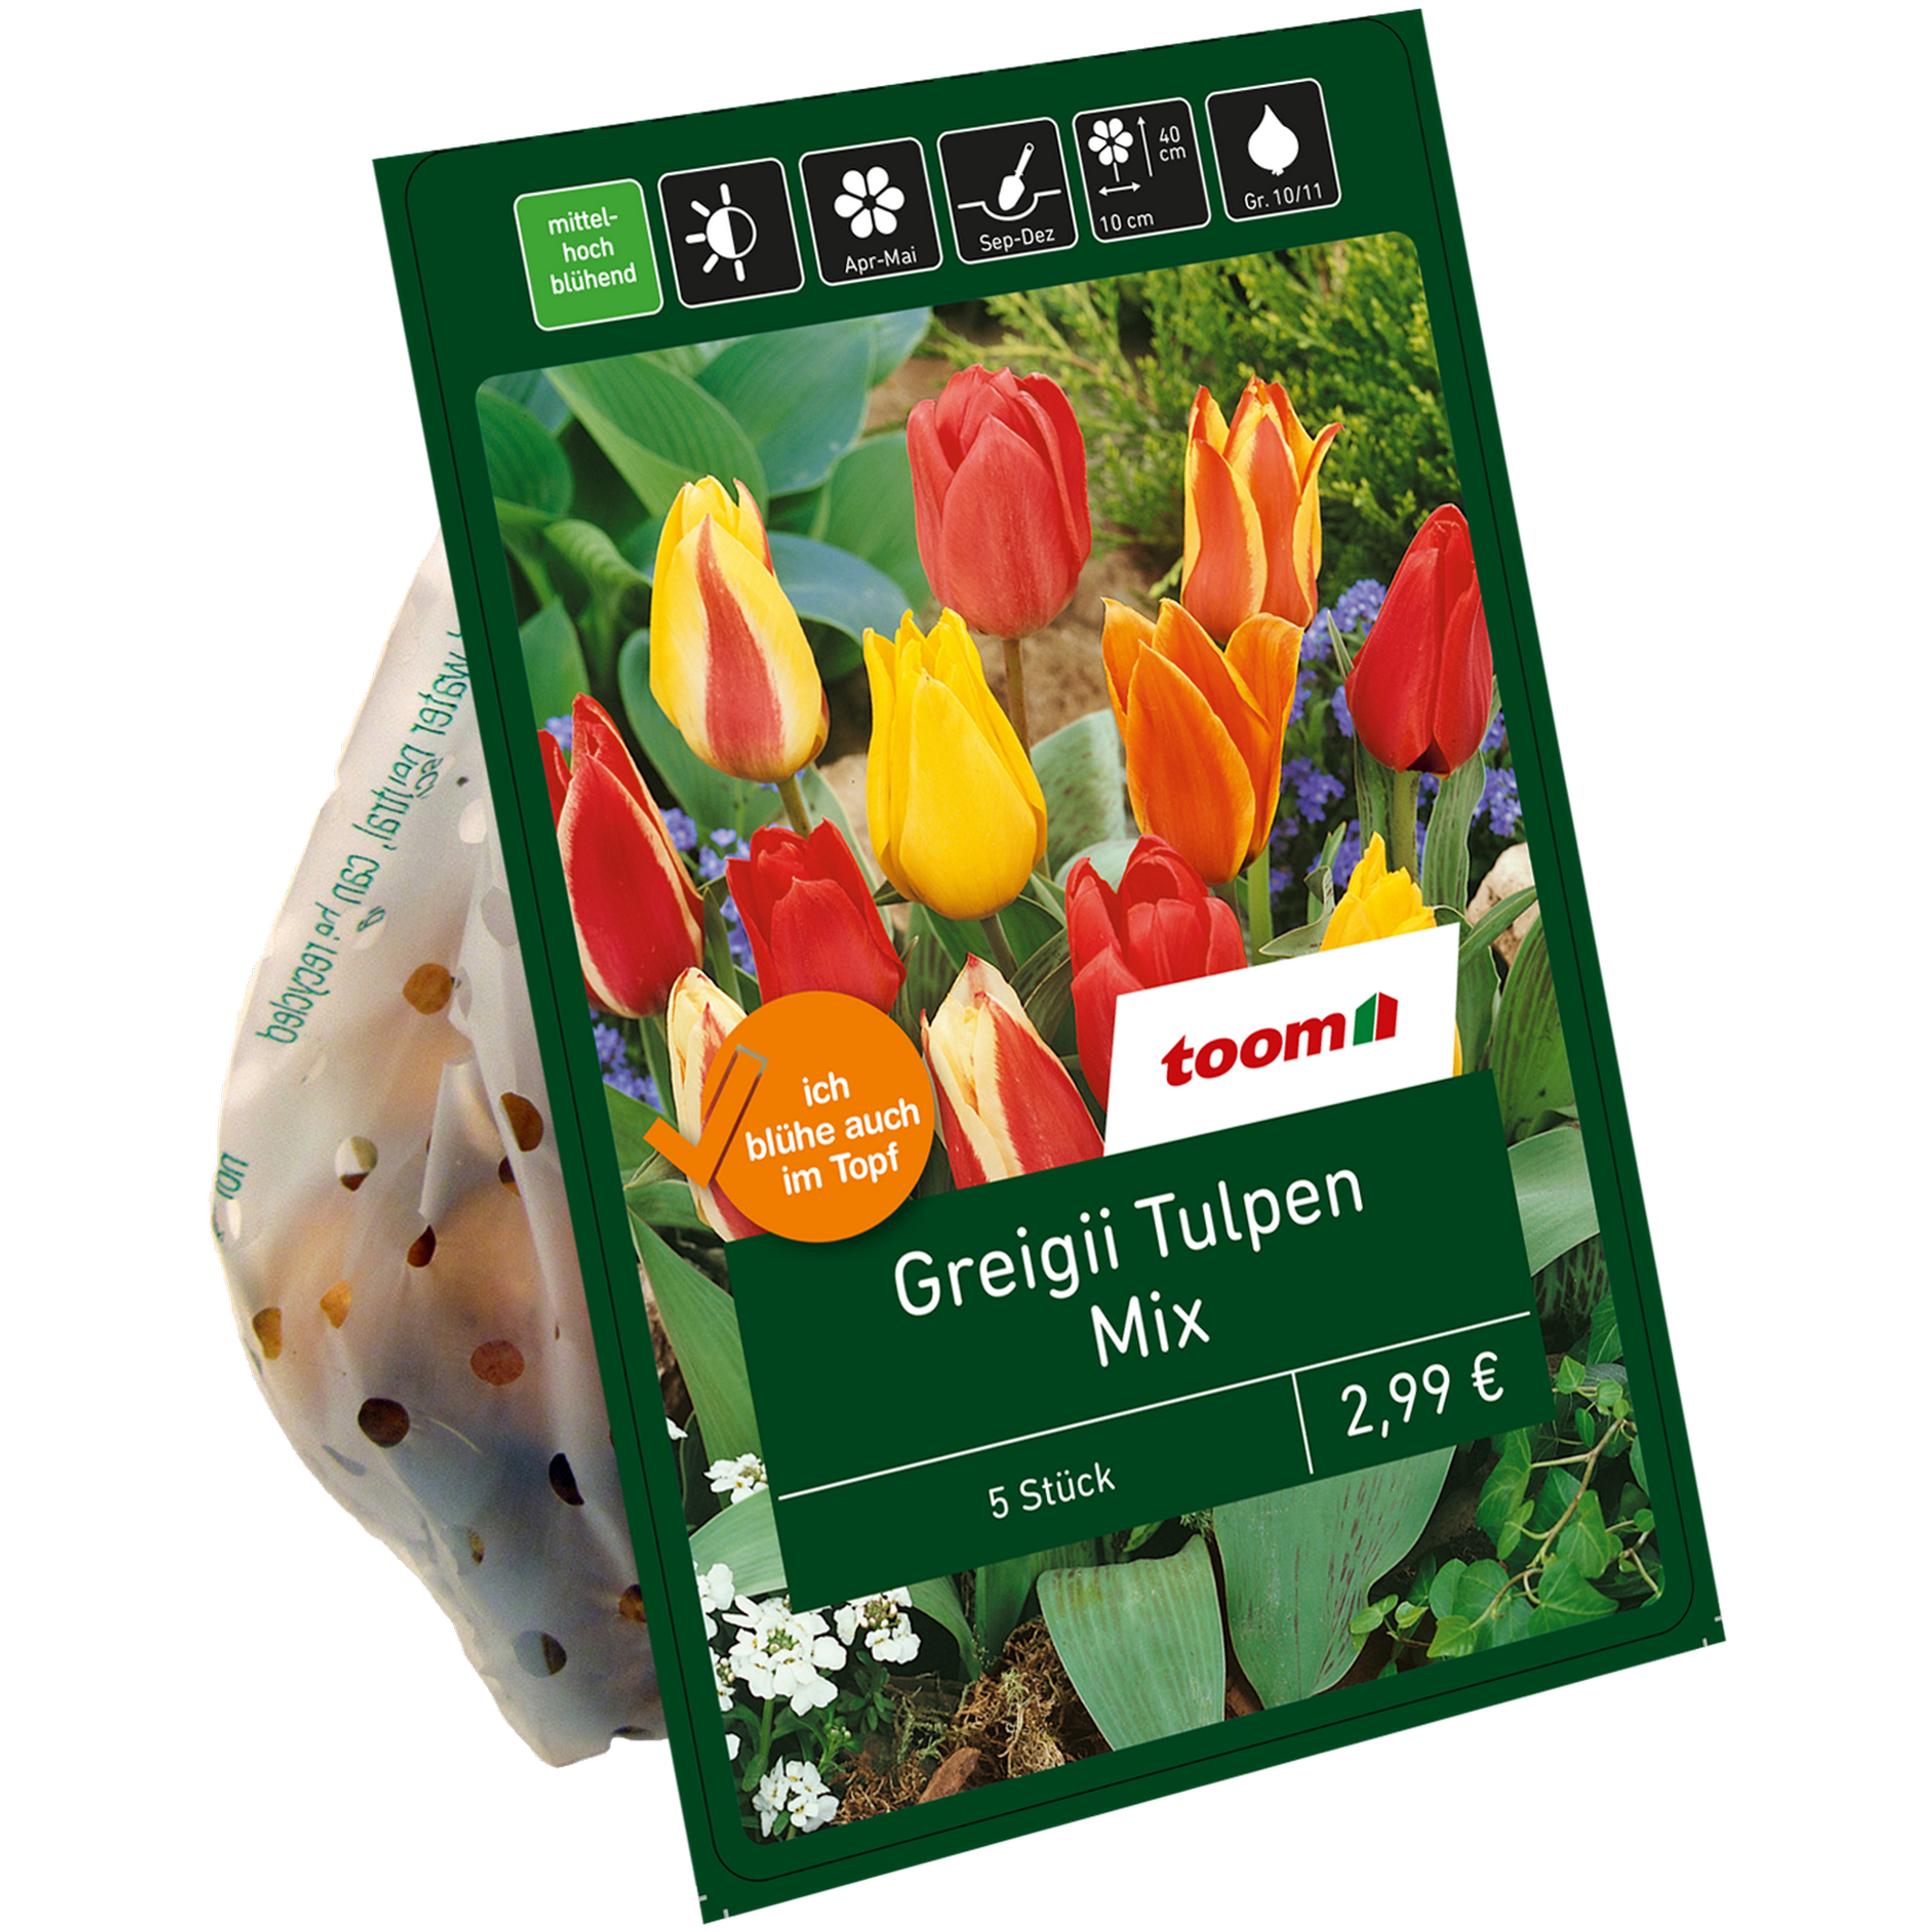 Greigii-Tulpen-Mix 5 Zwiebeln + product picture